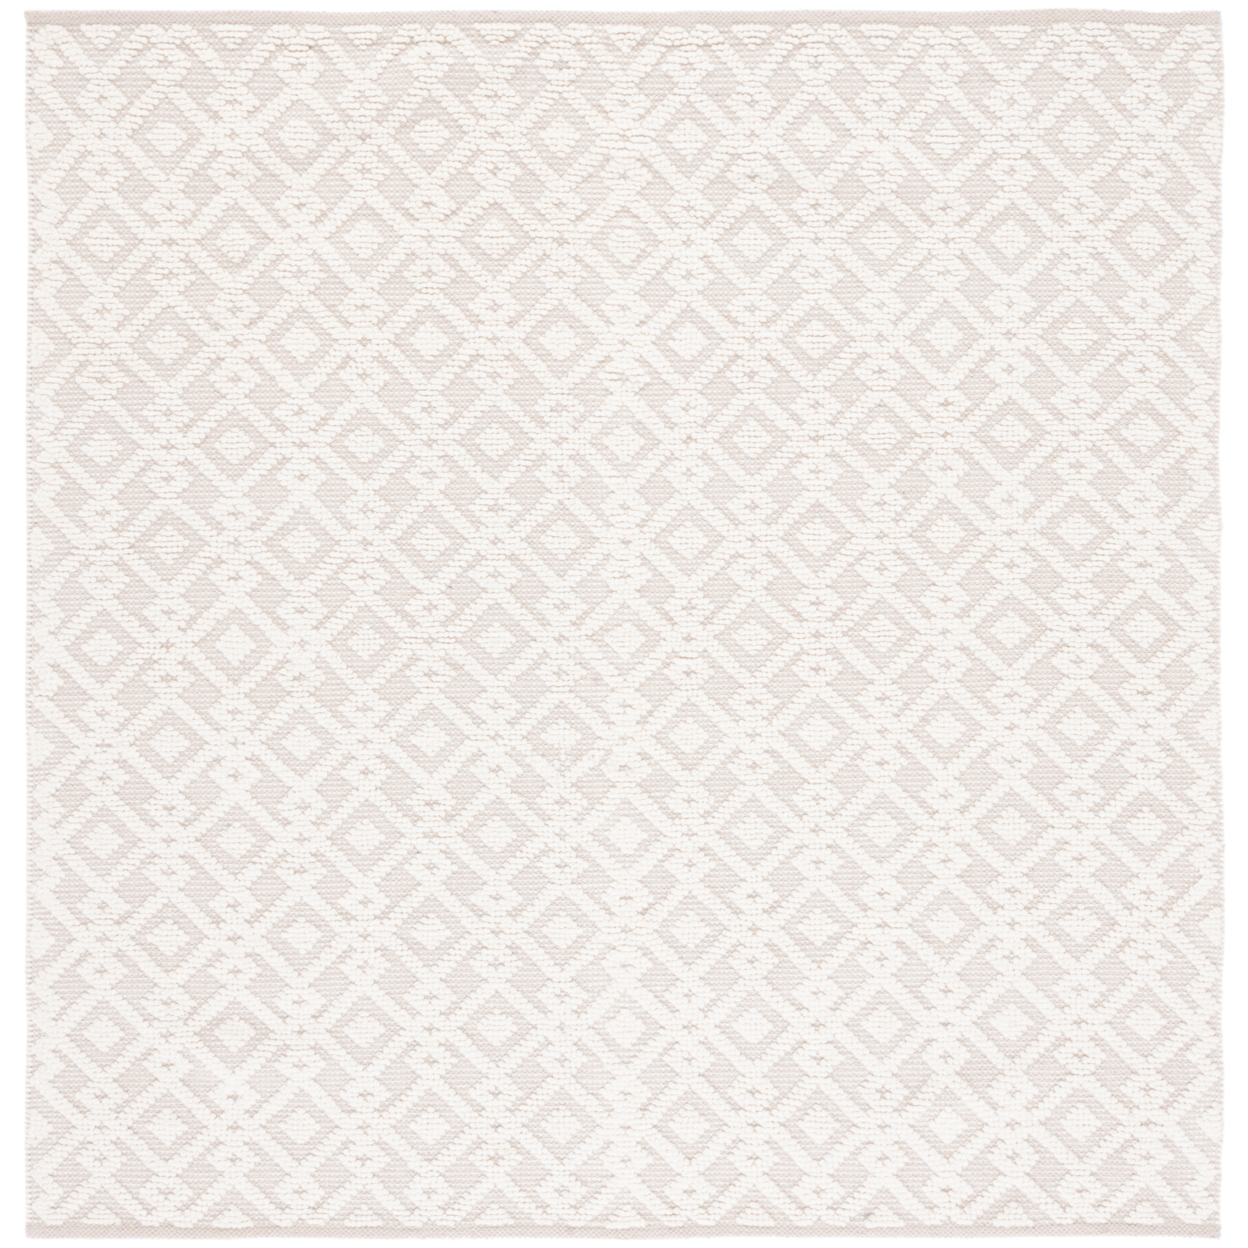 SAFAVIEH Vermont Collection VRM102A Handwoven Ivory Rug - 4' Square